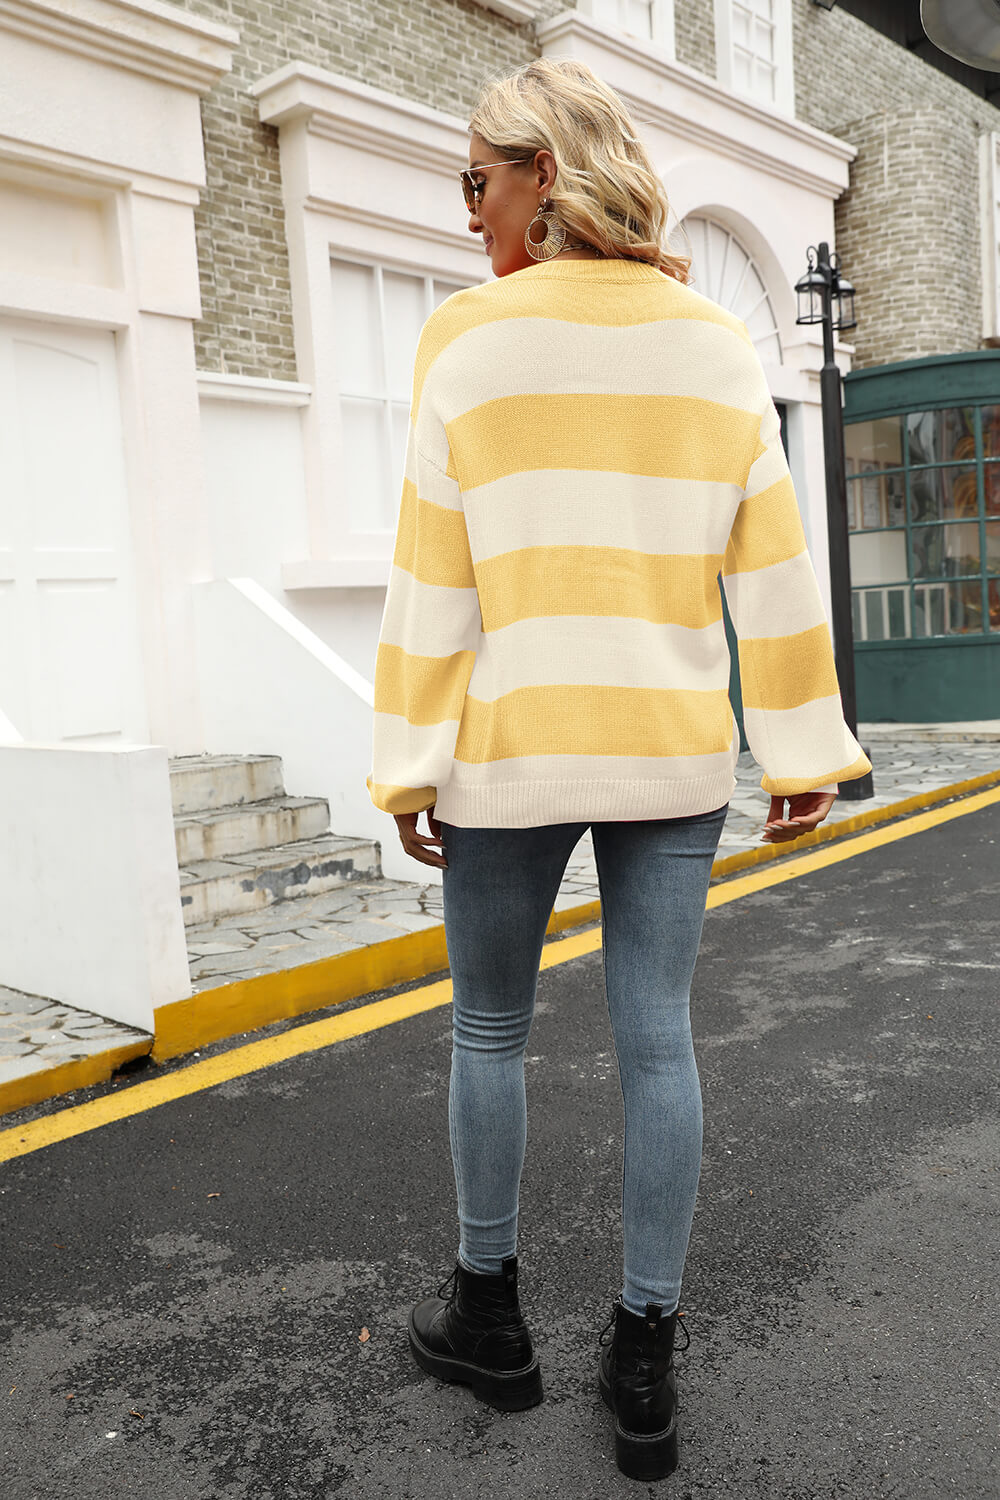 Ryann Striped Balloon Sleeve Knit Pullover- 1 size Small/Yellow and 1 size Small/Orange-Fuchsia left! FINAL SALE!